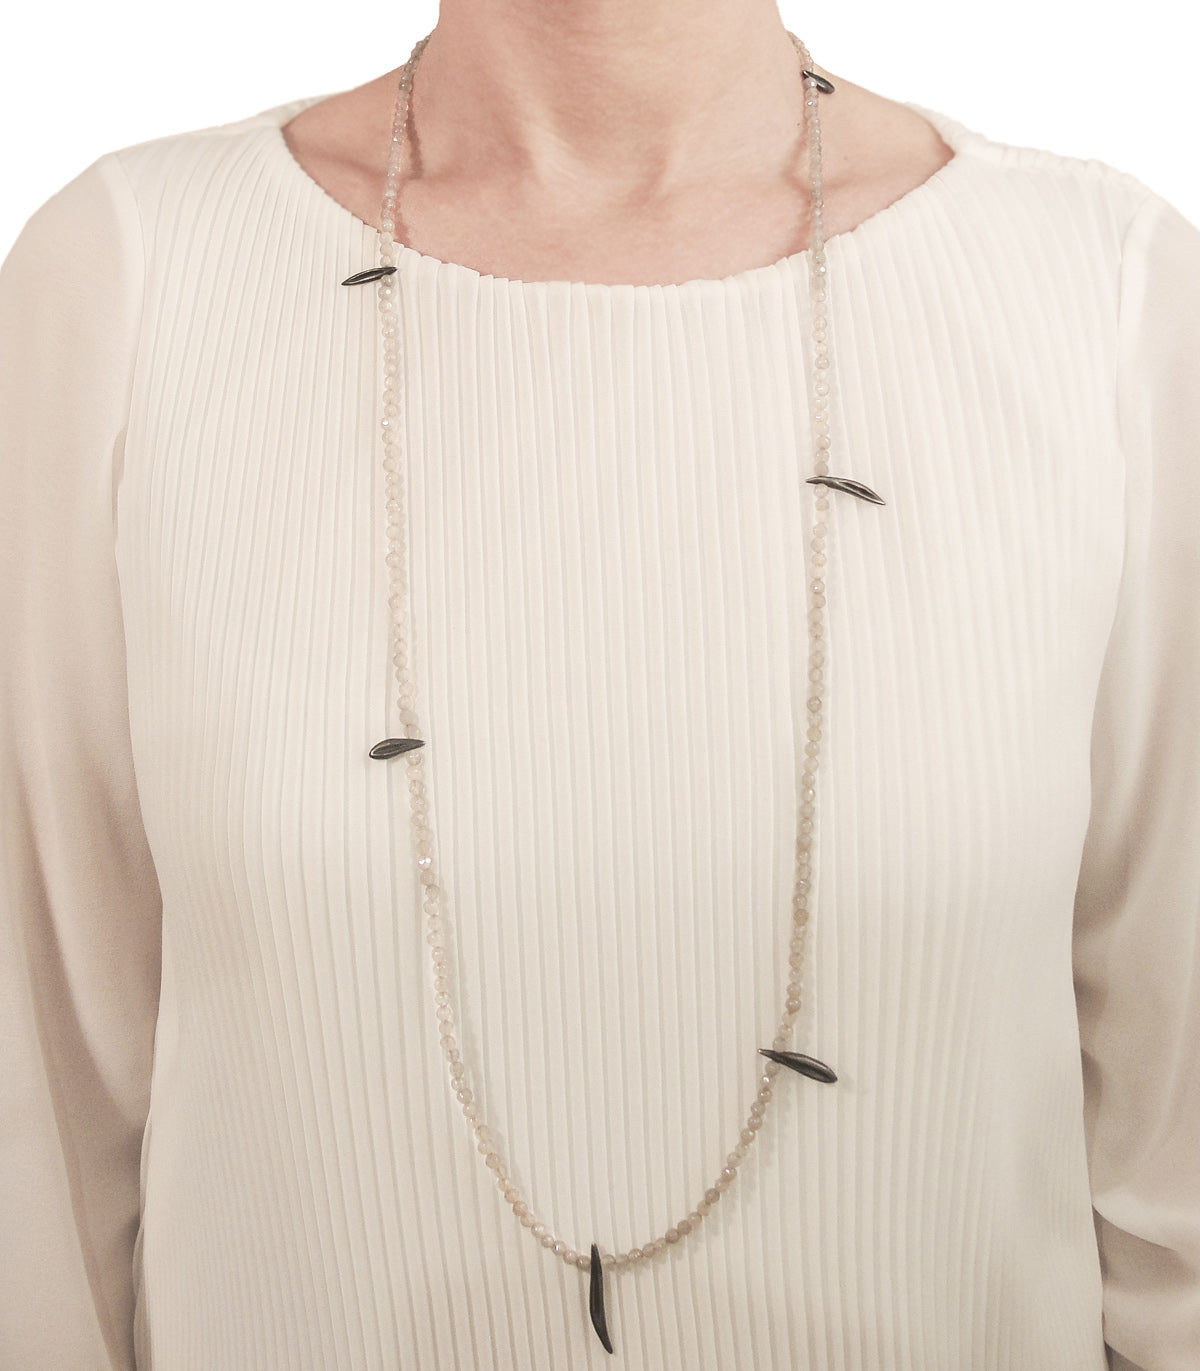 LONG GRAY AGATE LEAVES NECKLACE